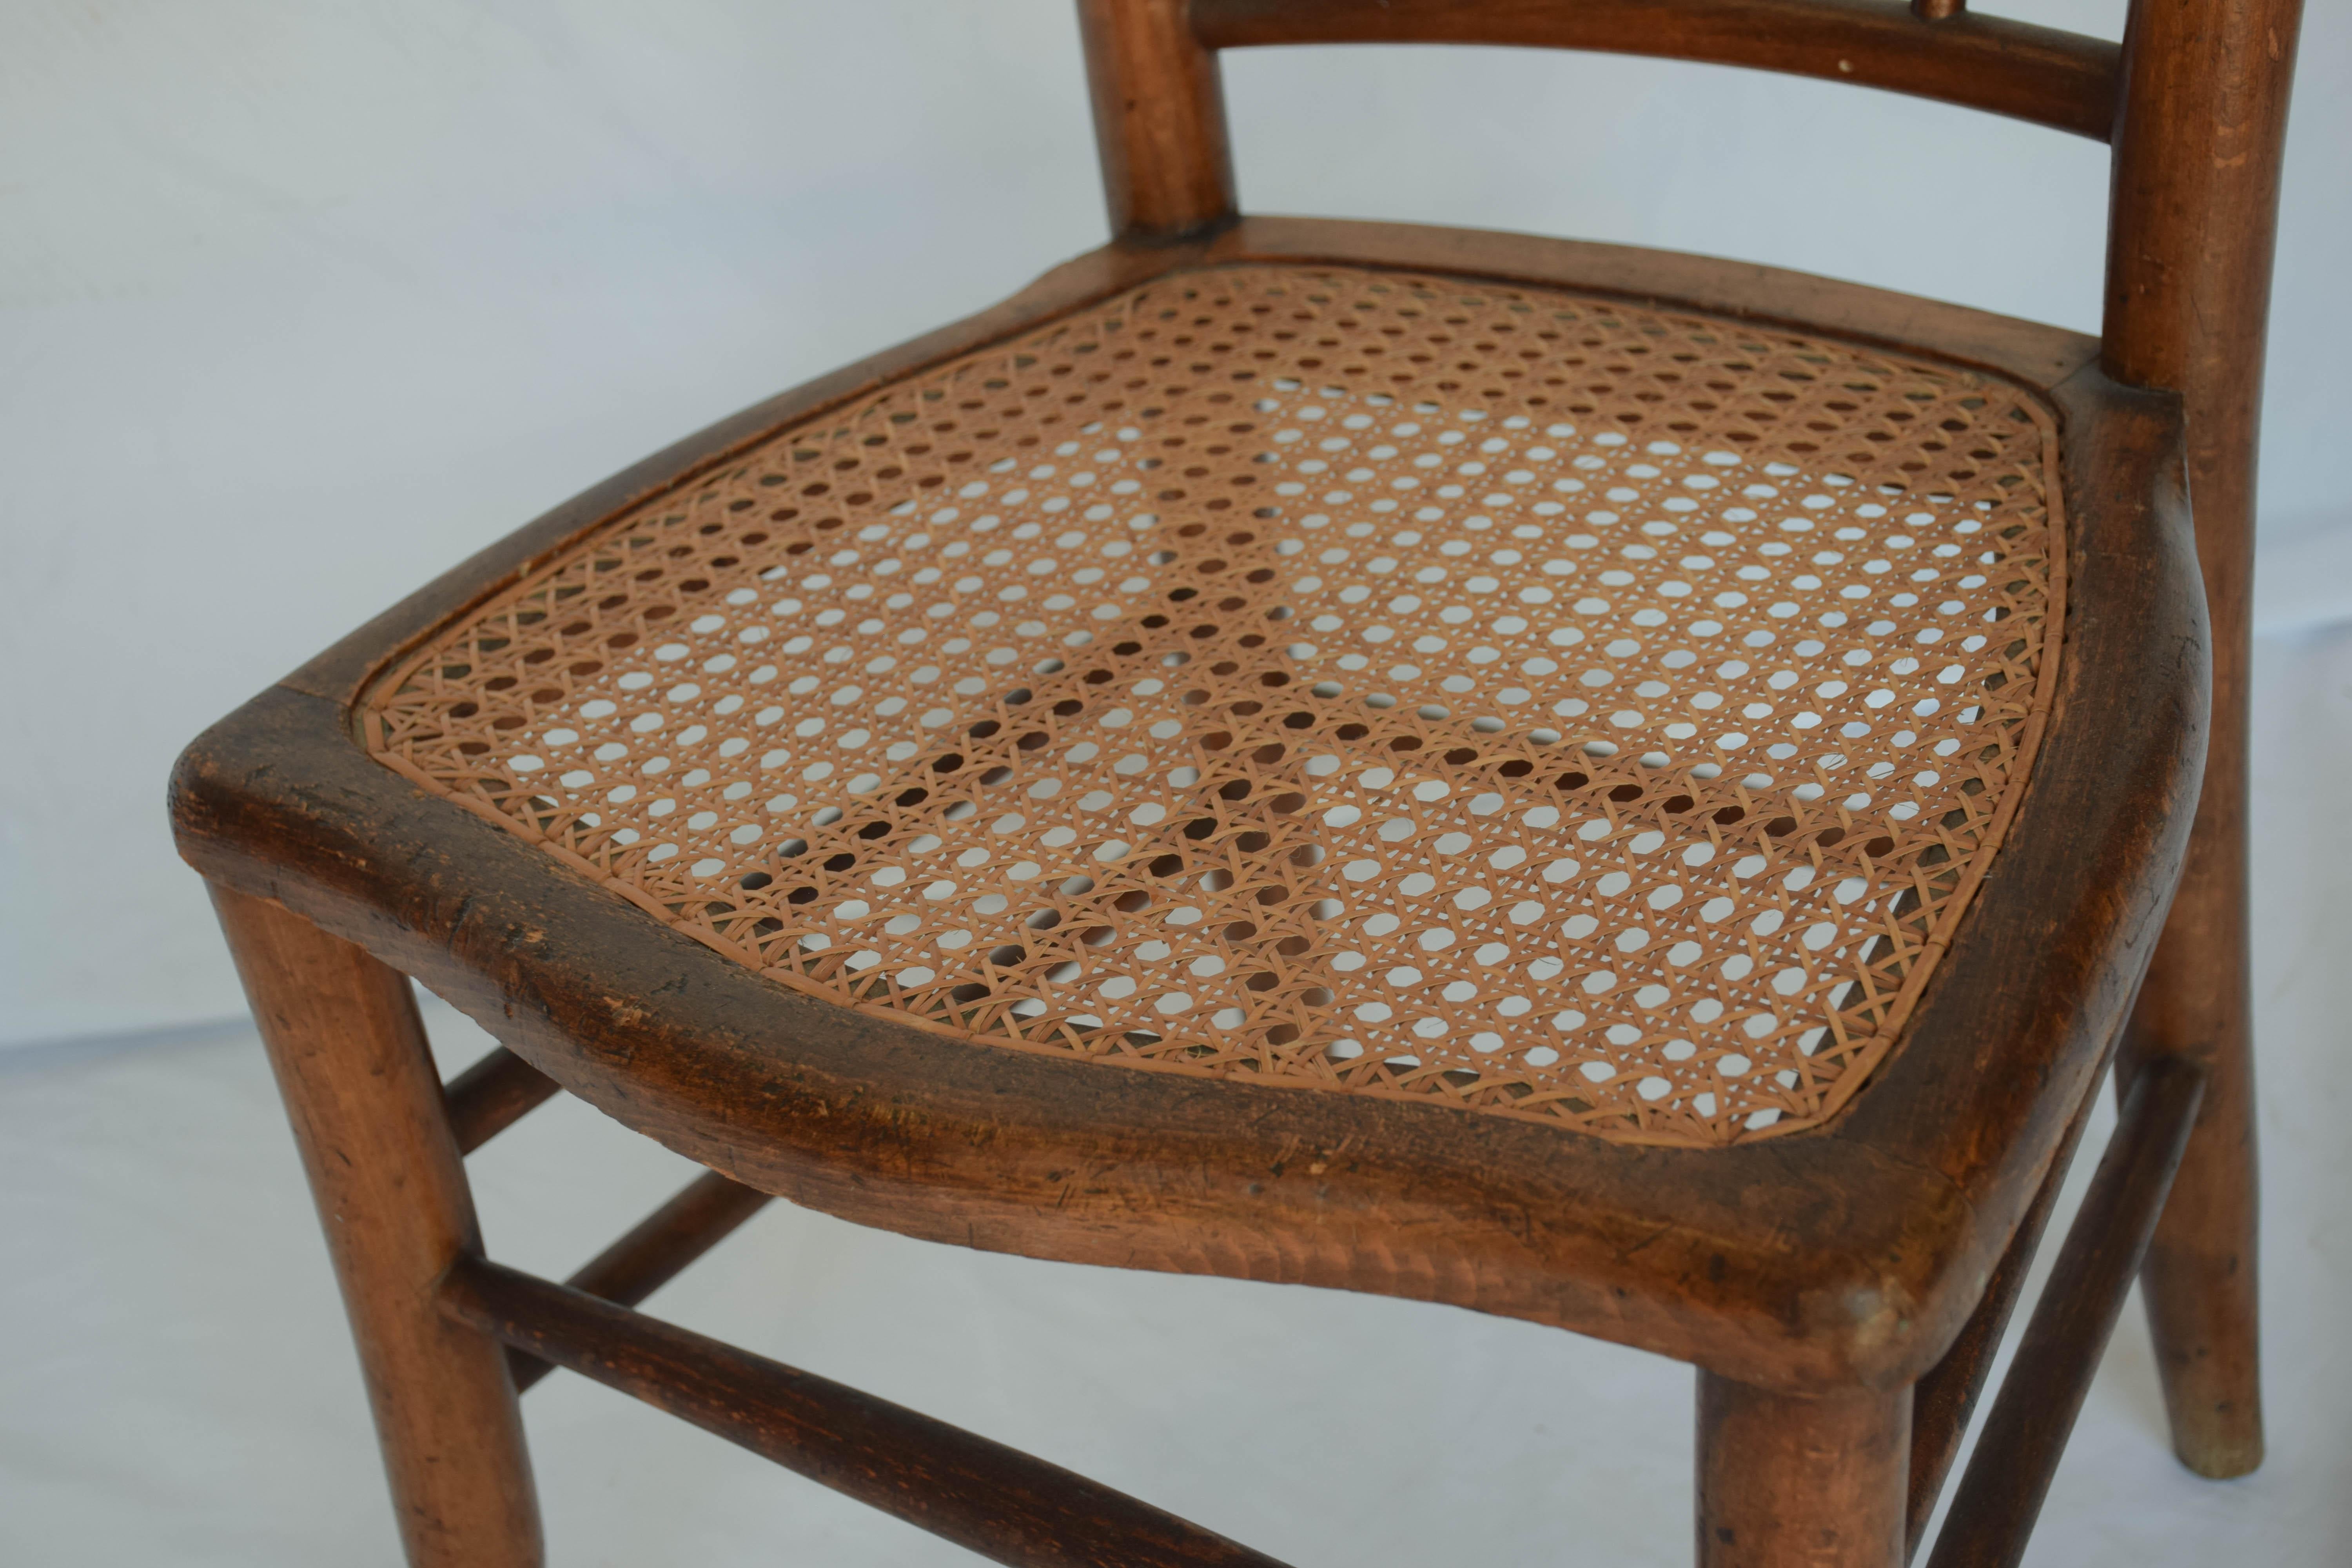 cane seat chairs